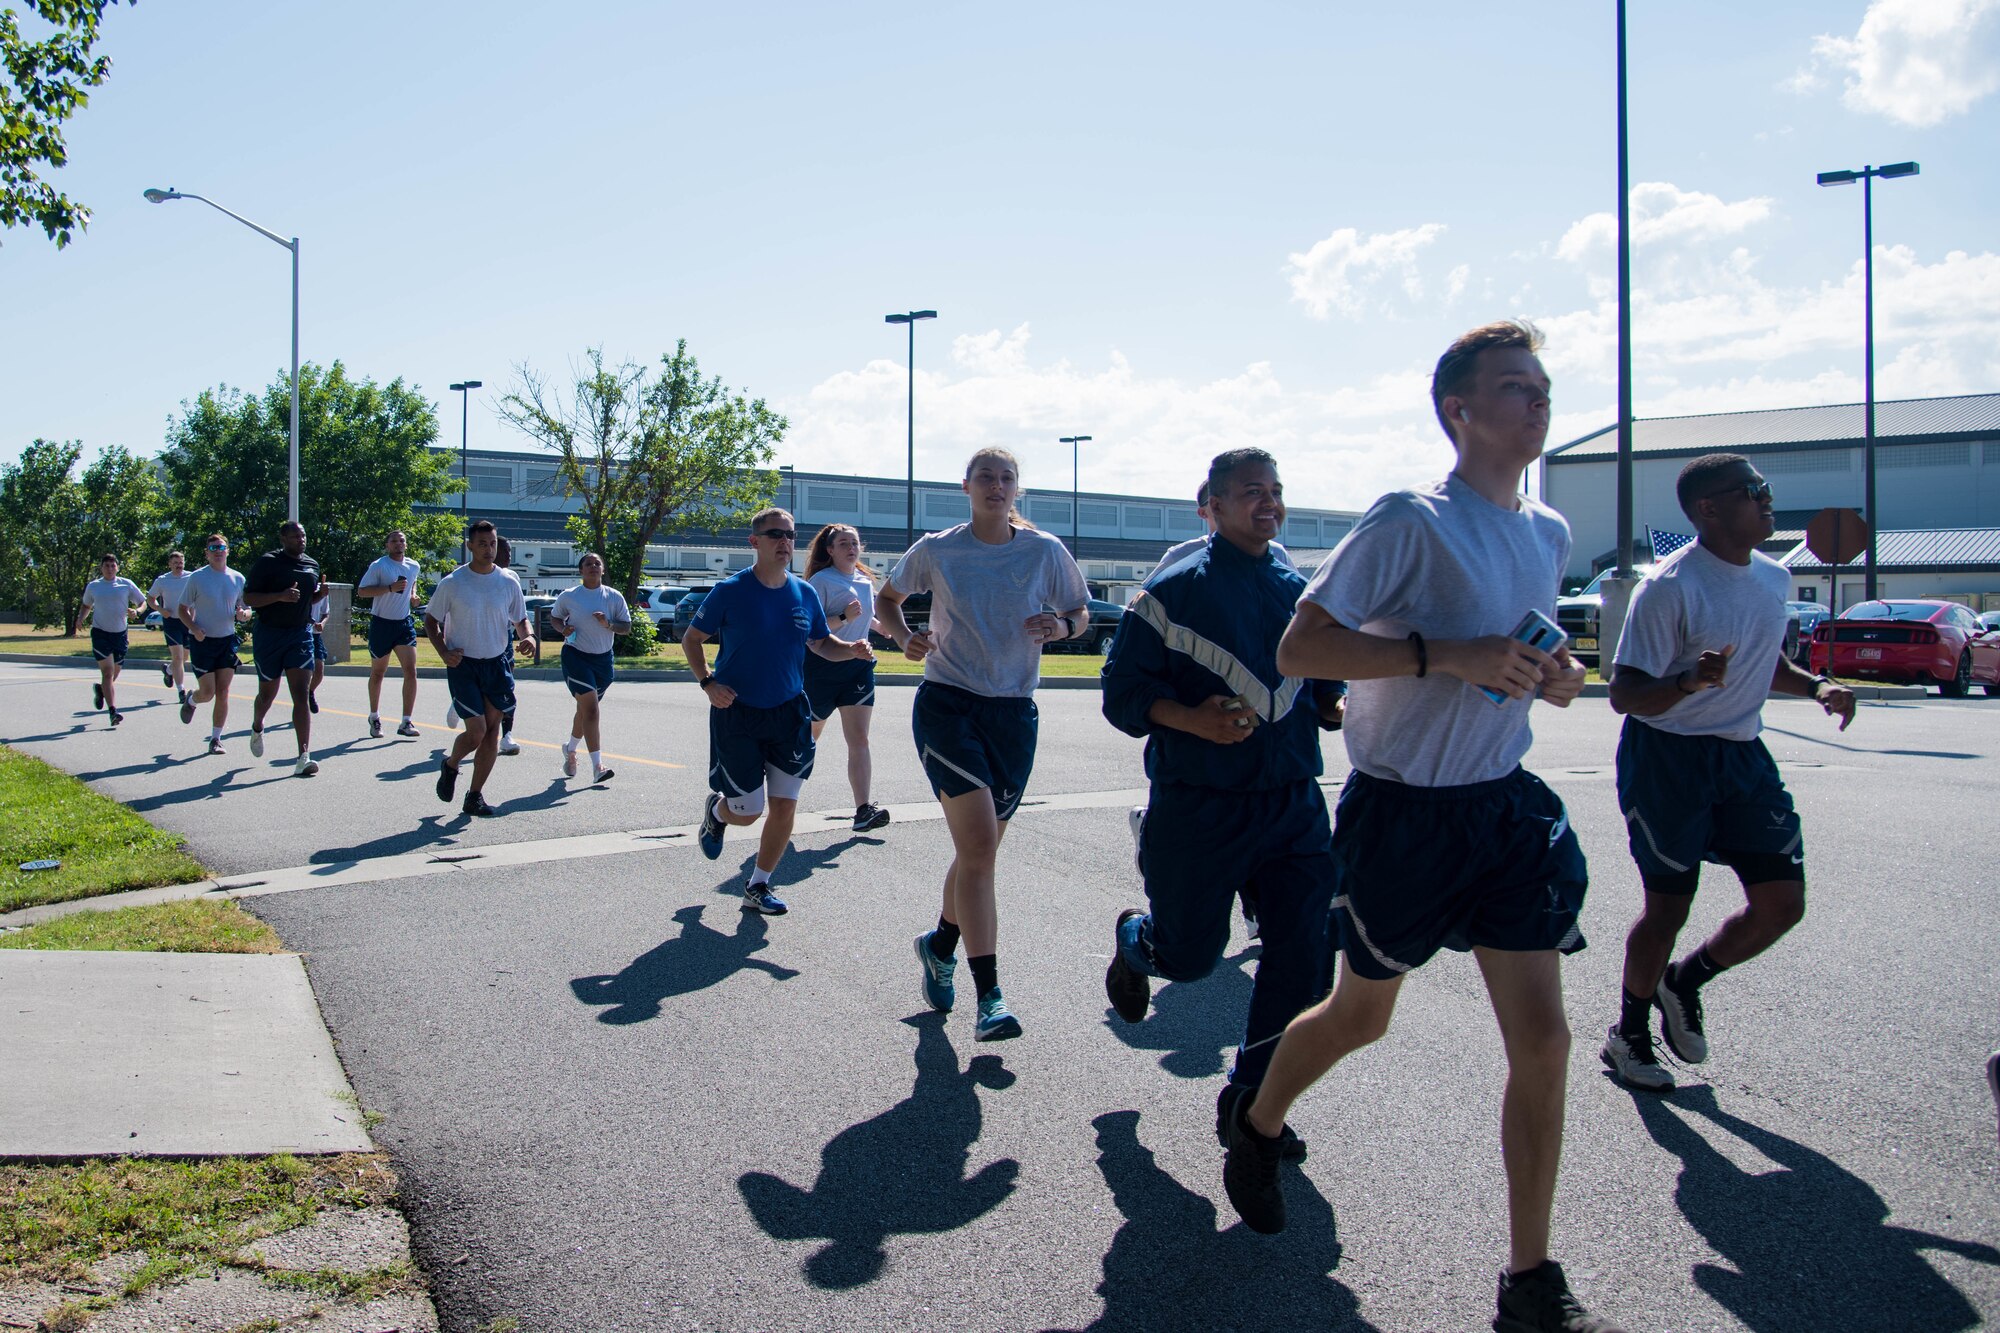 Port Dawgs from the 436th Aerial Port Squadron begin the memorial run June 29, 2020, at Dover Air Force Base, Delaware. The Port Dawg Memorial 5K is a career field-wide tradition that has been held for nearly two decades, typically during National Transportation Week; however, this year’s timeline was adjusted due to COVID-19. (U.S. Air Force photo by Airman 1st Class Faith Schaefer)